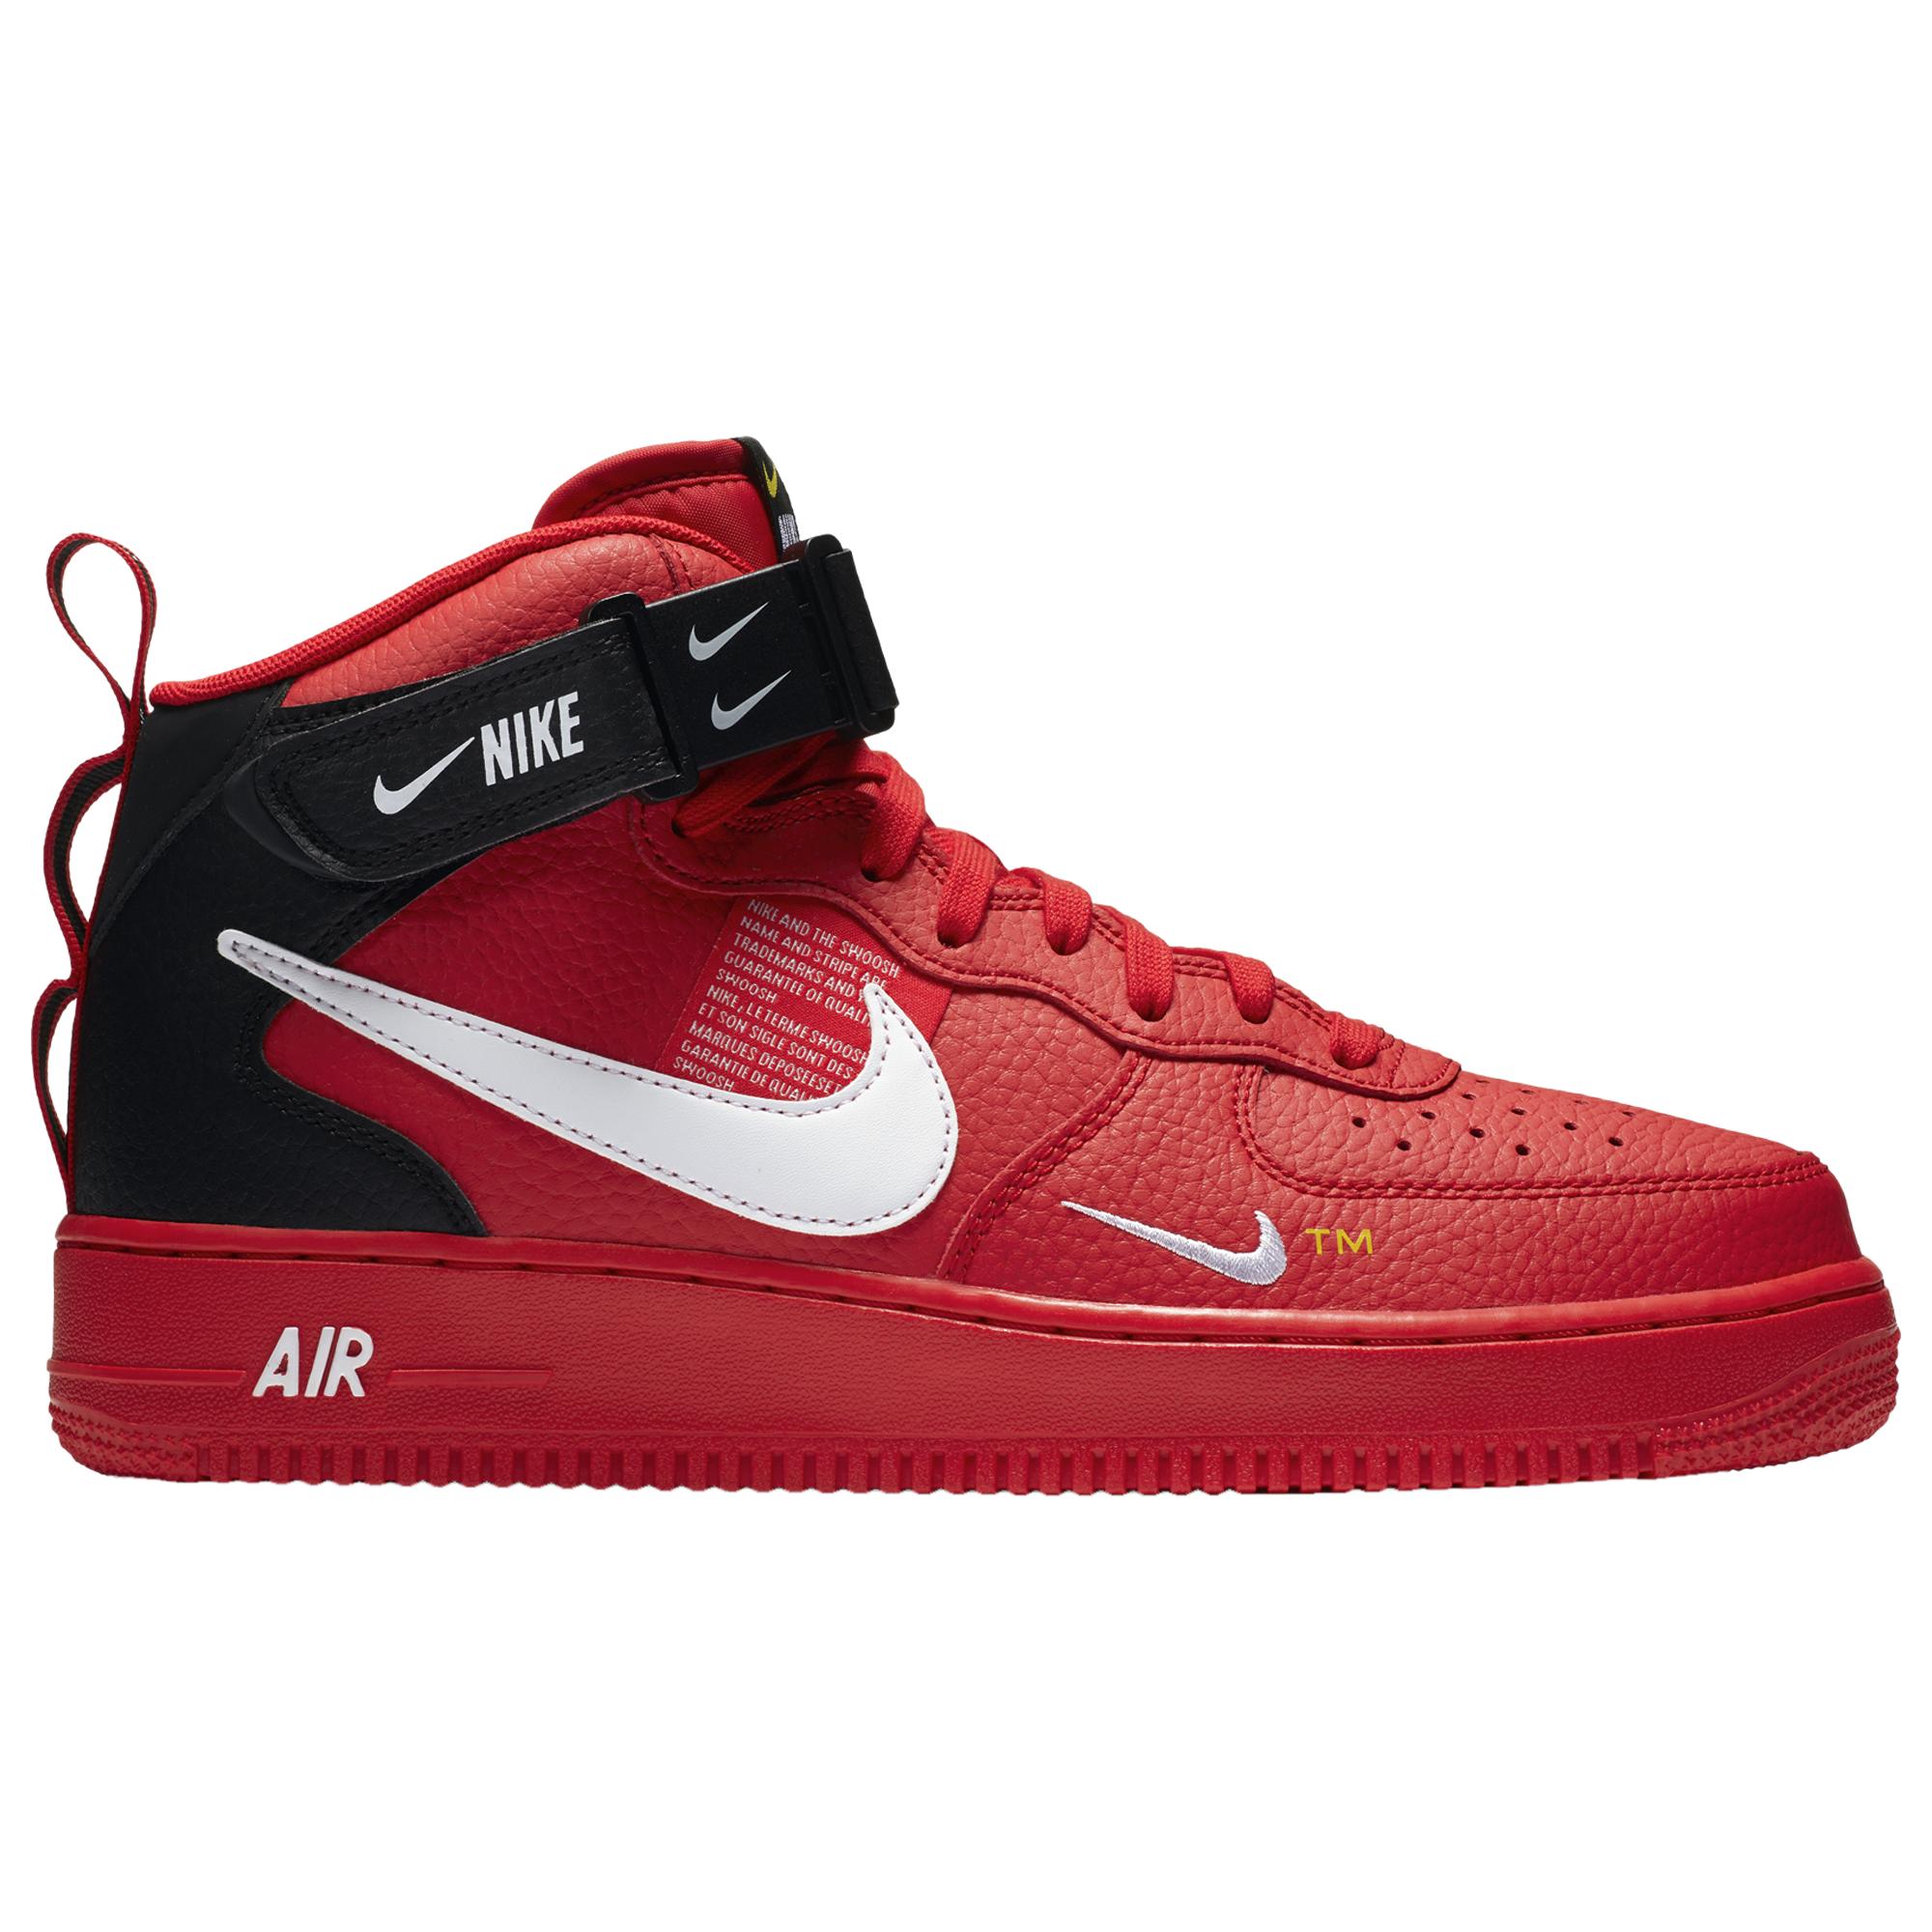 Nike Air Force 1 Mid 07 Lv8 High-top sneakers in Red for Men - Lyst